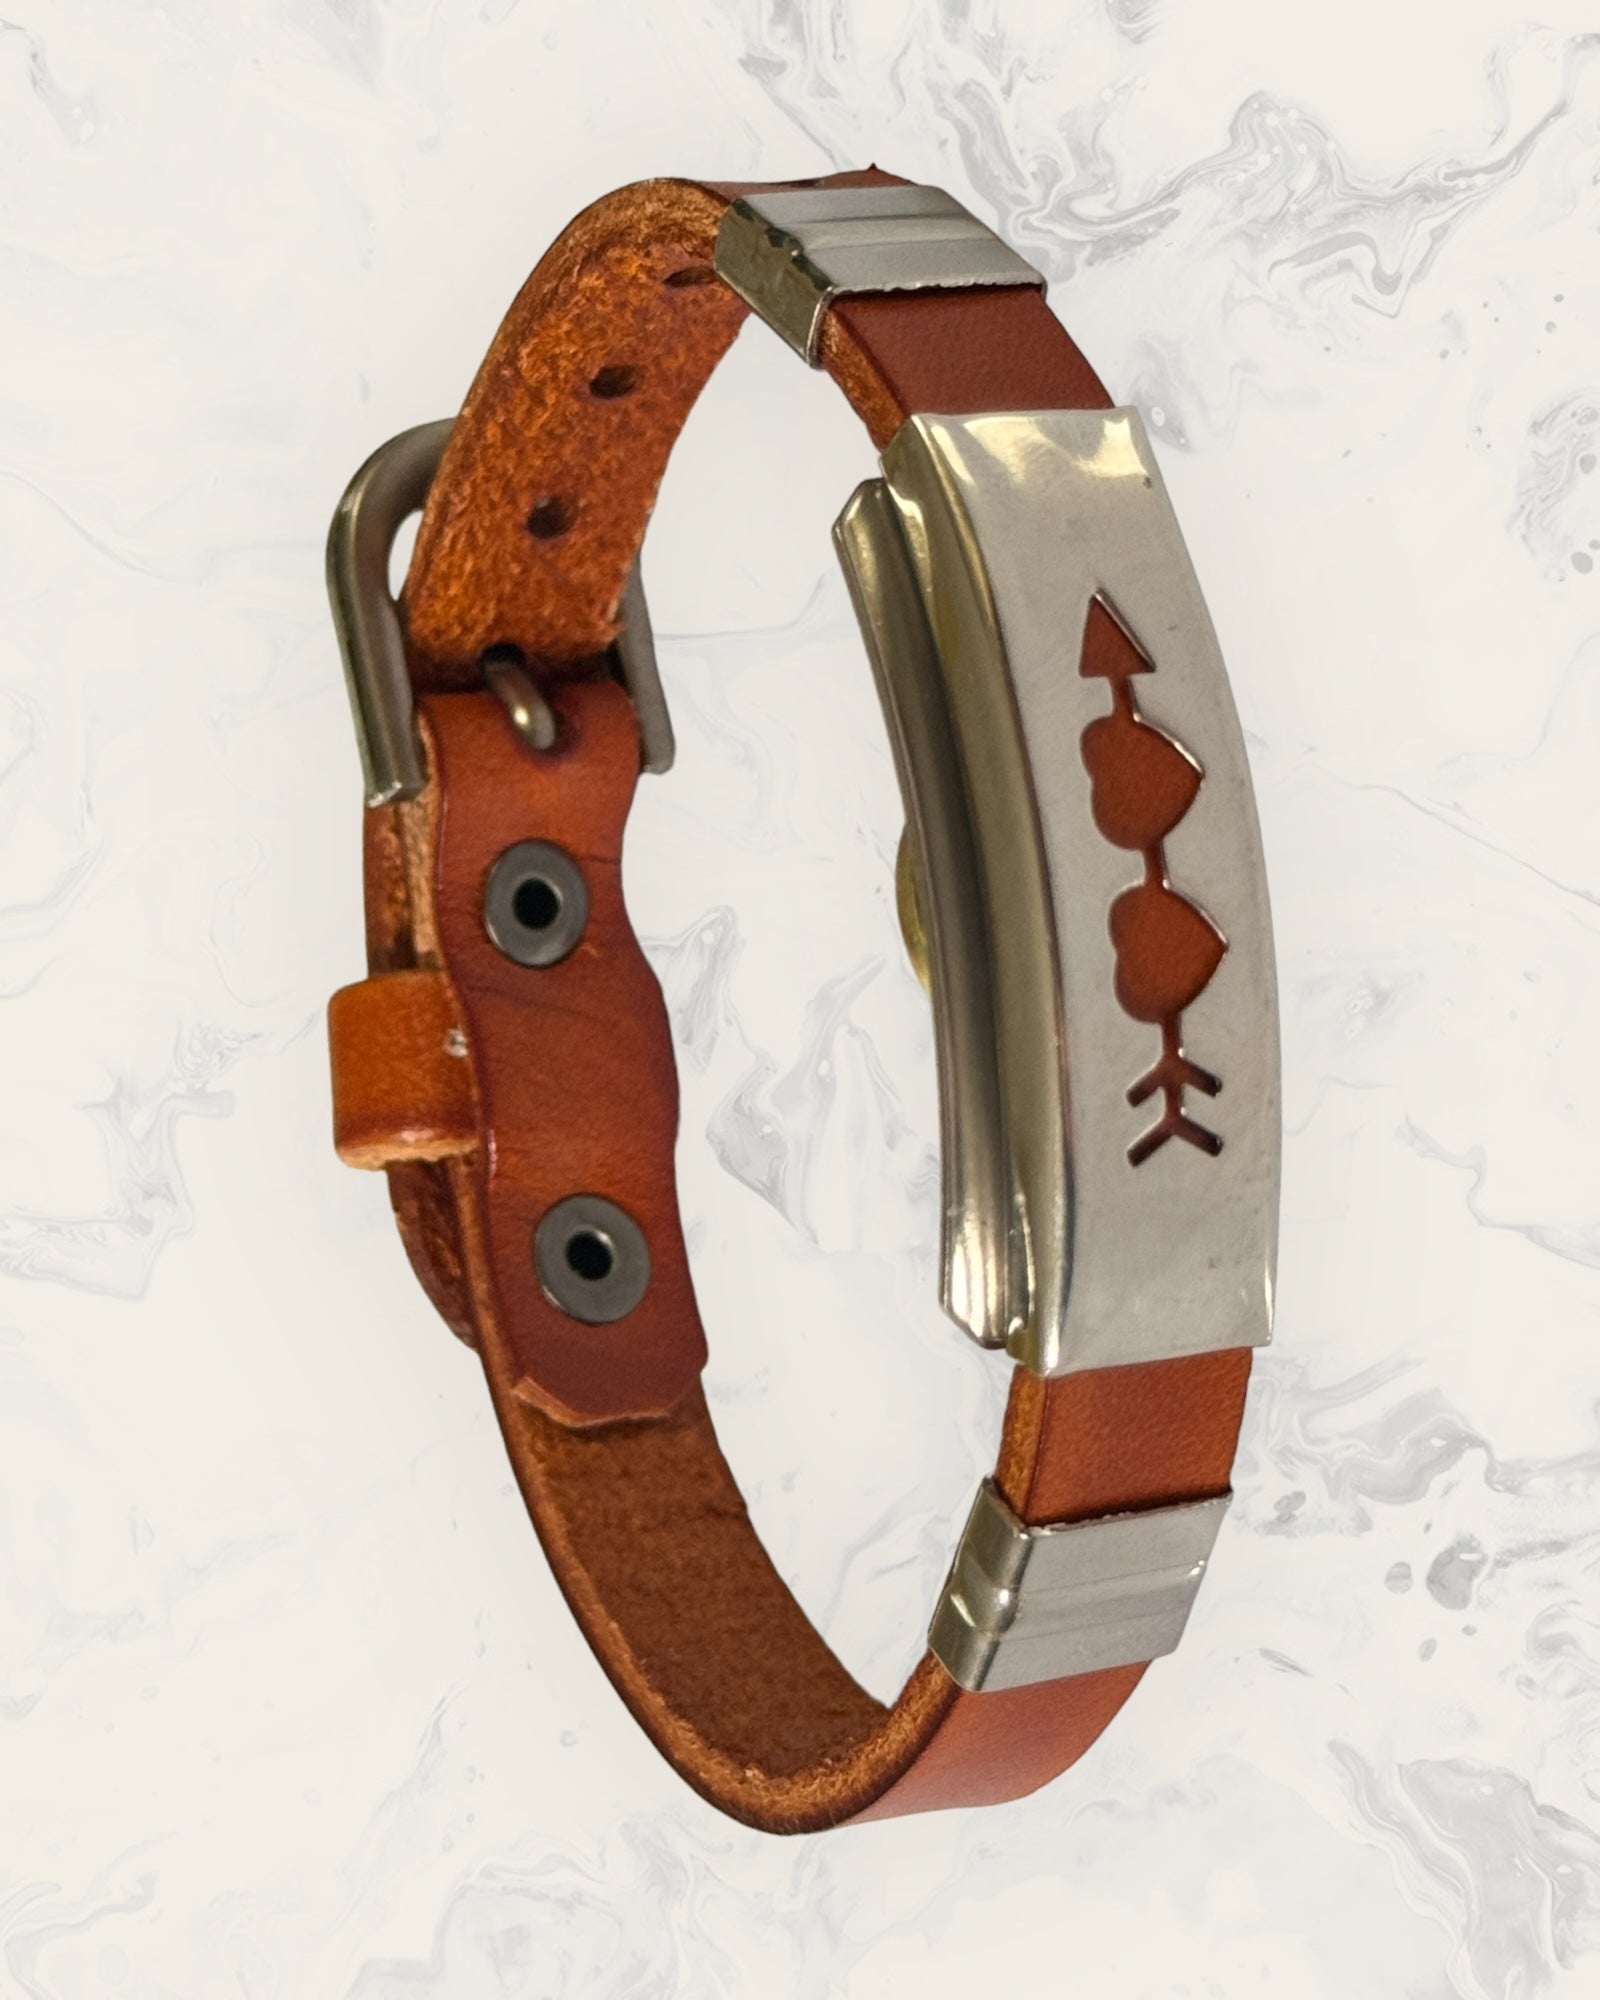 Frequency Jewelry Natural Pain Relief and EMF Protection Bracelet Leather Band Color Burnt Orange with Two Hearts and an arrow design on a silver metal slider